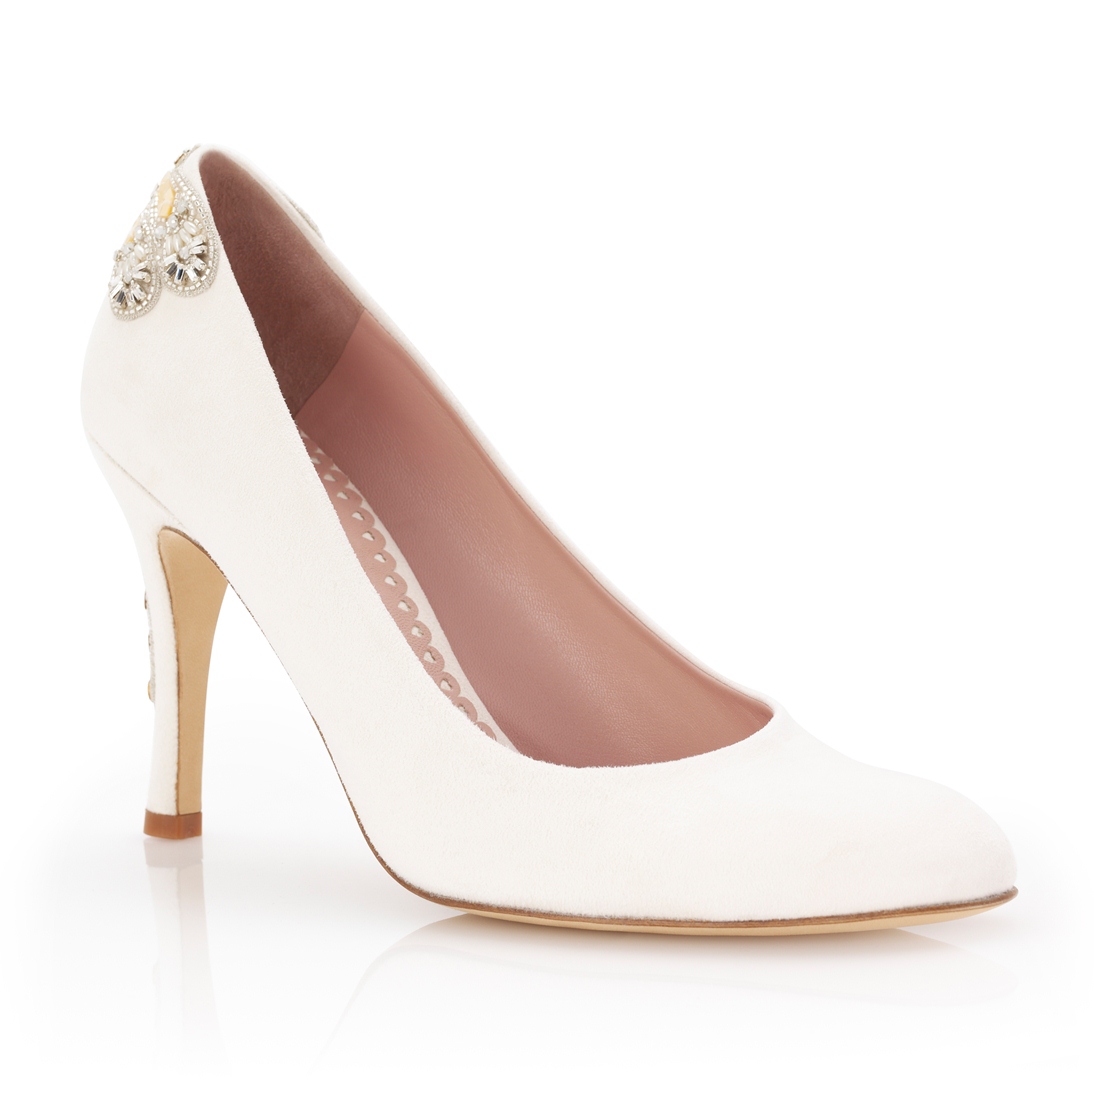 Dragonfly Ivory from the Celeste Collection by Emmy Shoes